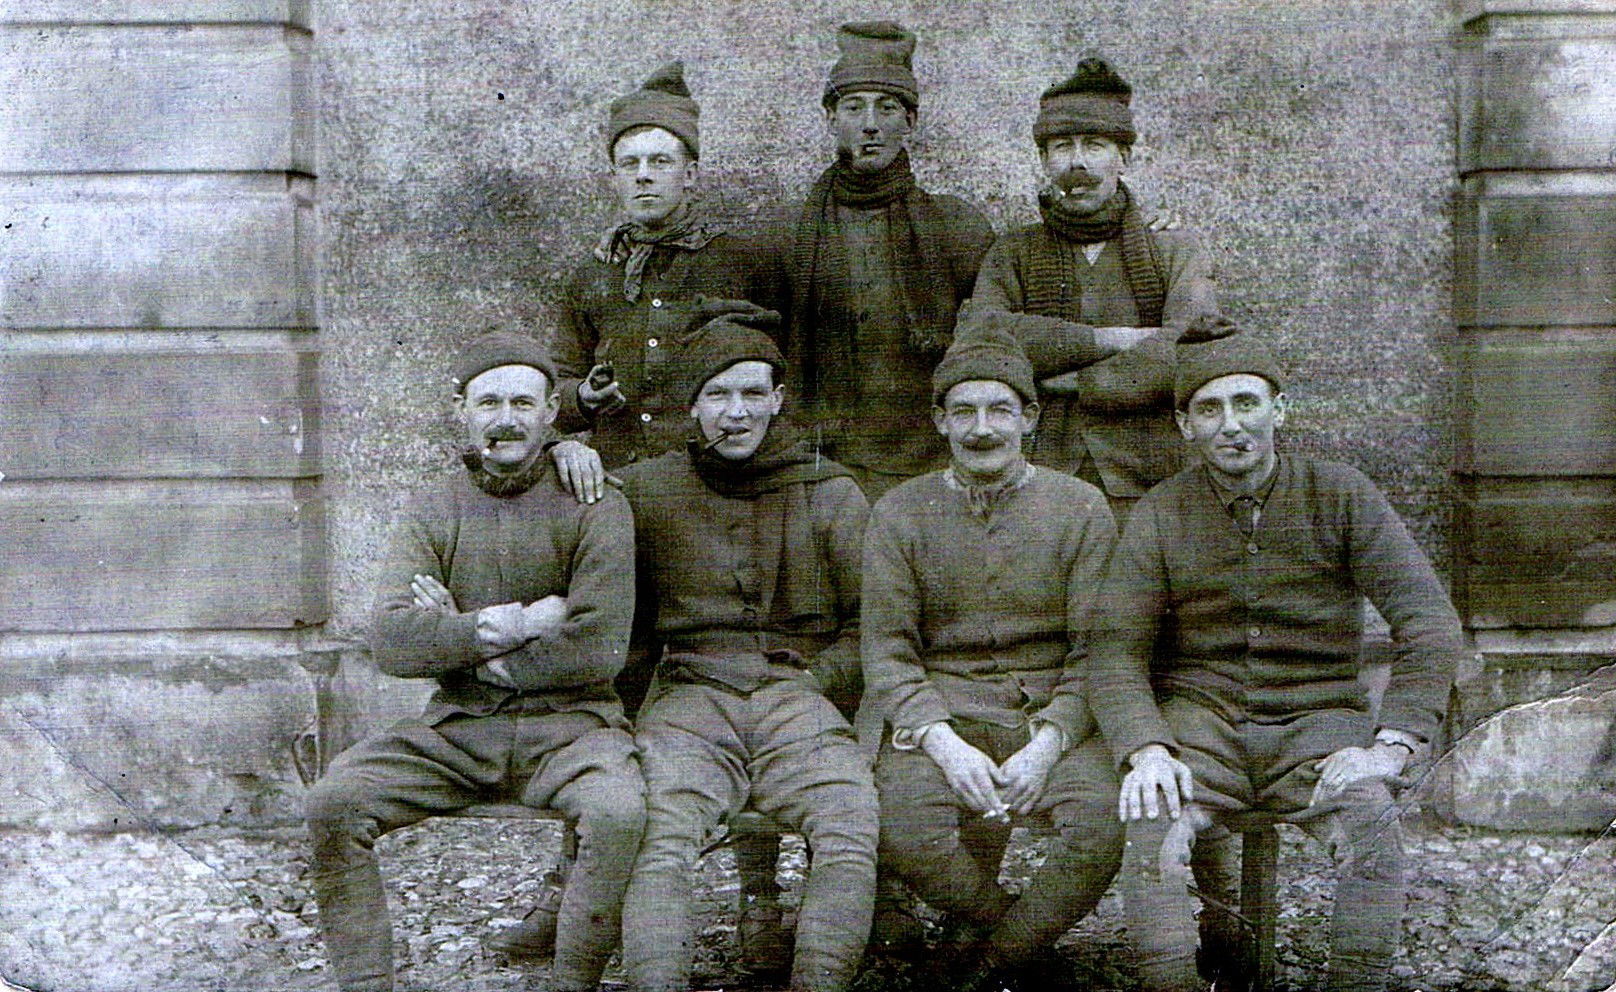 JACOBS, David Henry (Henry). 30. Serjeant. Named as the figure second from the left in the front row in a postcard which belonged to Private Broadhead and taken at Watford in 1914 with members of 2nd Troop, C Squadron, courtesy of Stuart Shaw.